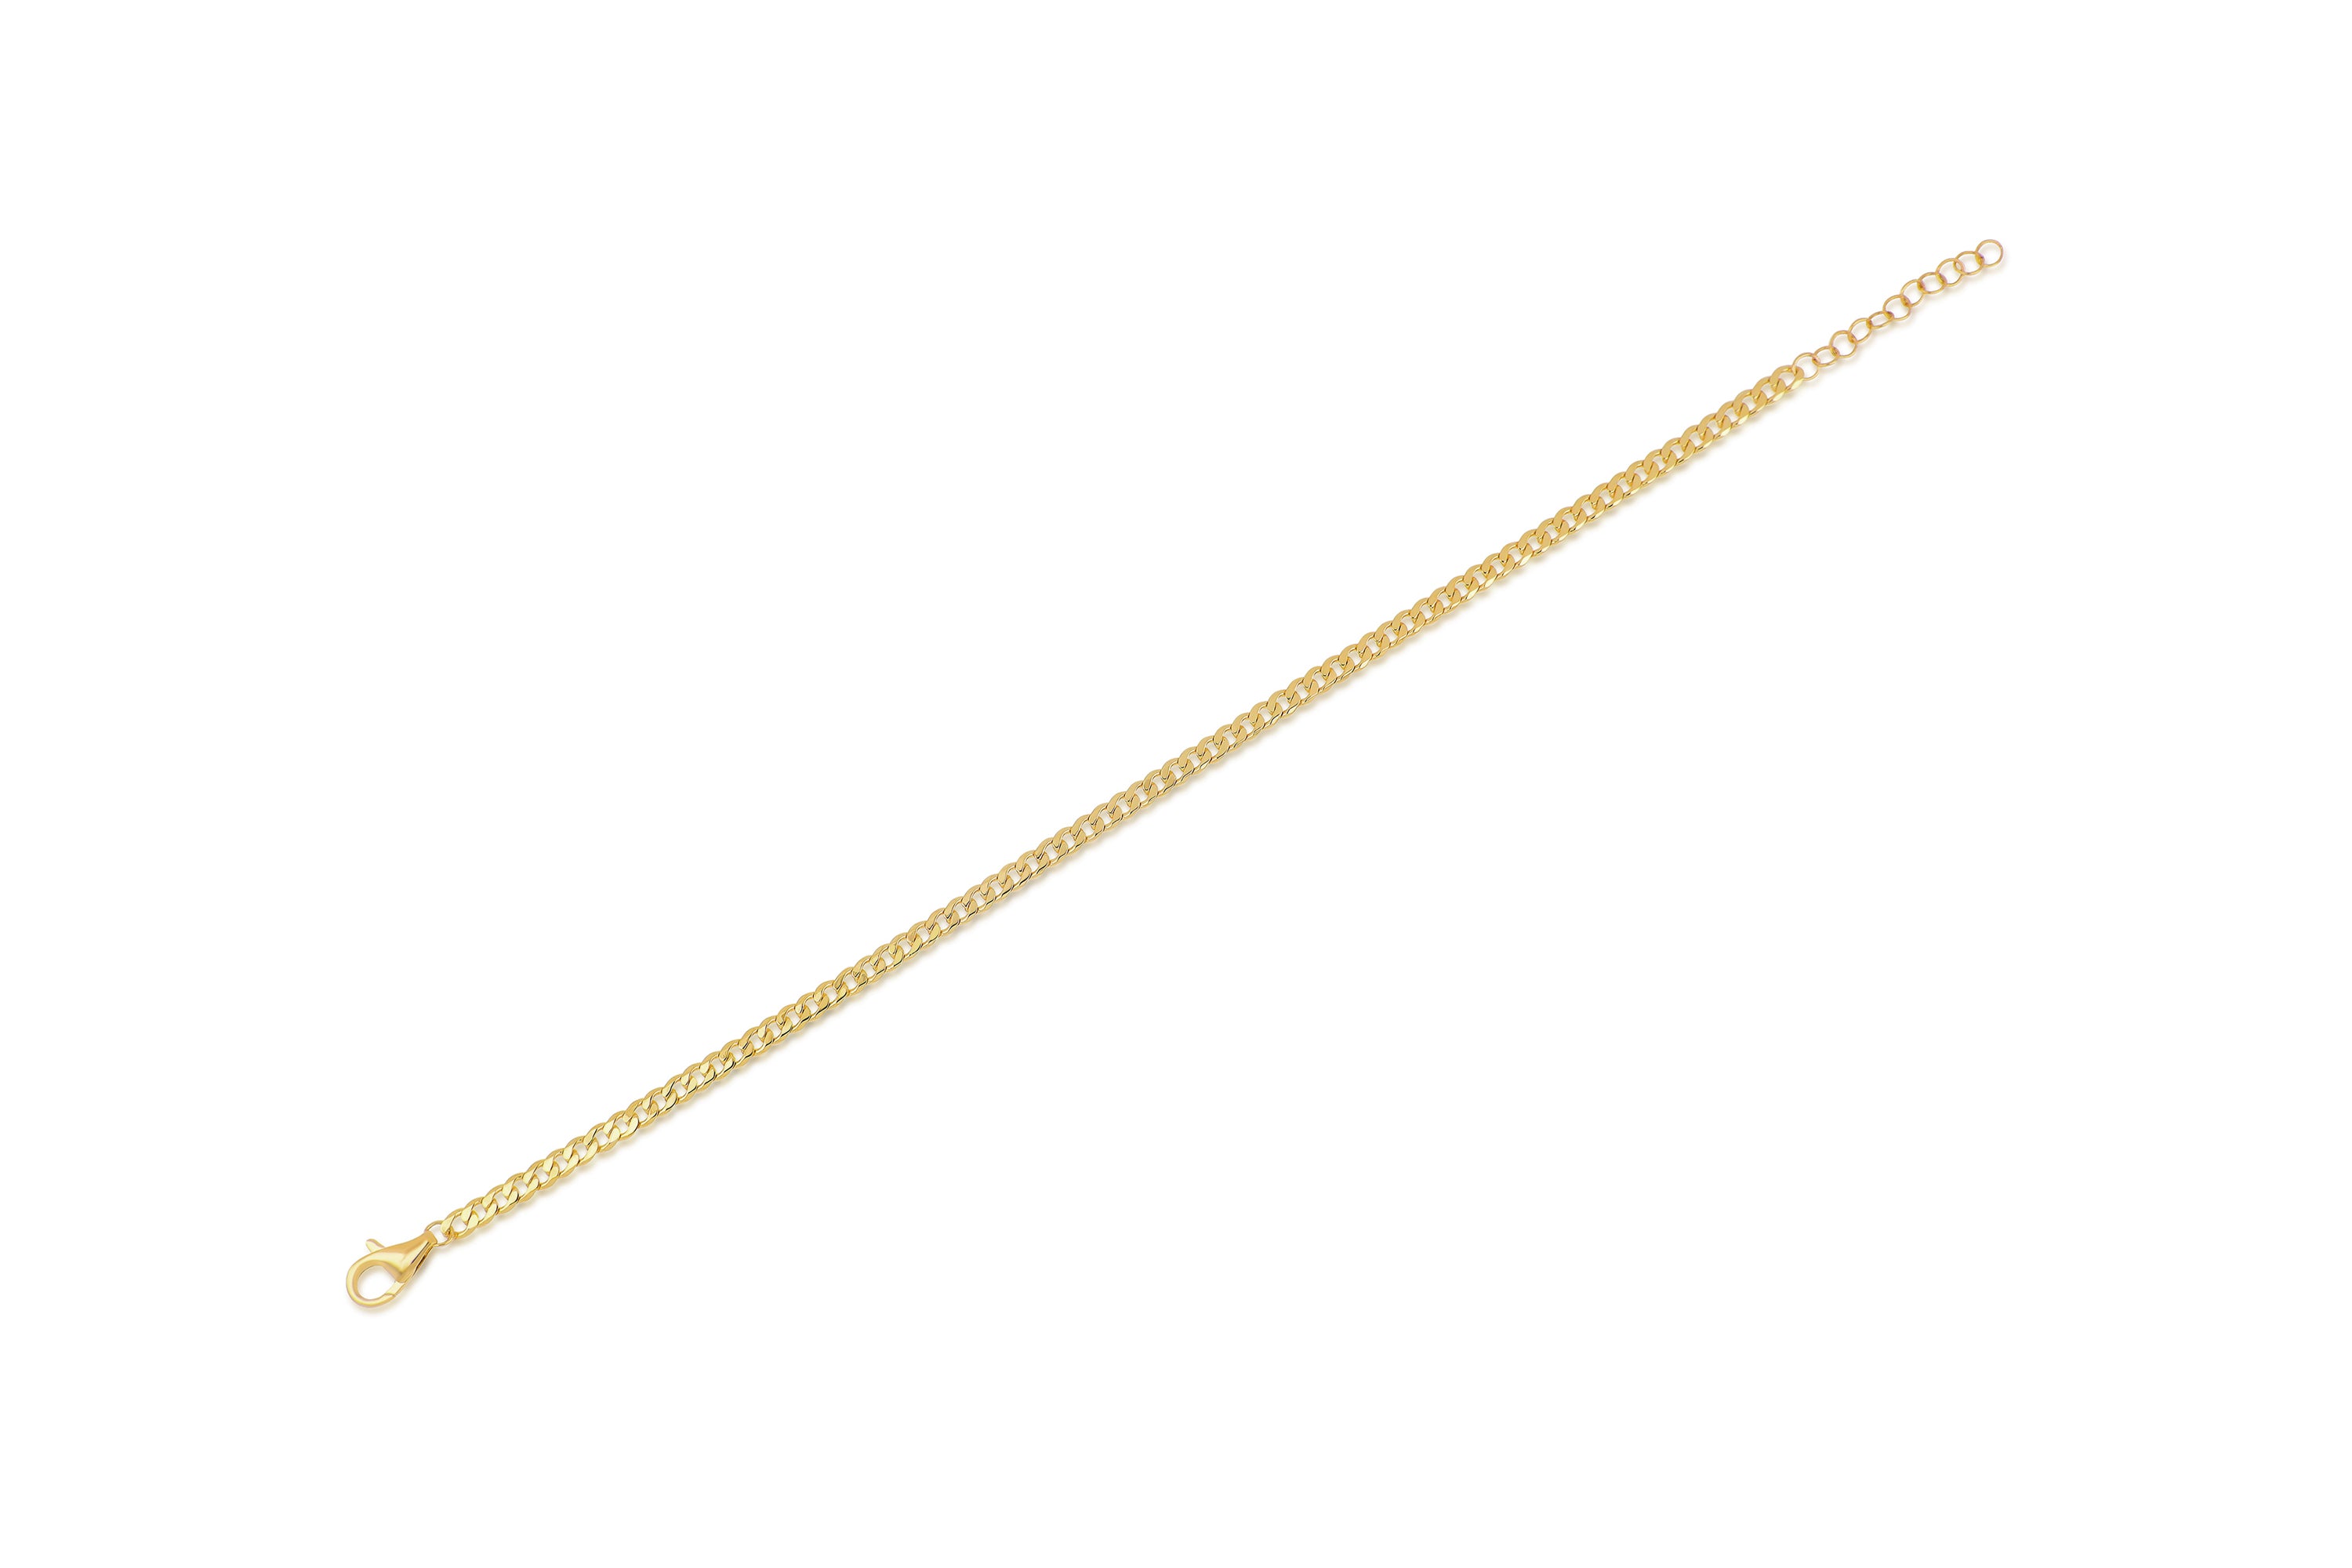 14k (karat) yellow gold curb chain anklet with 1 inch extension chain and lobster clasp